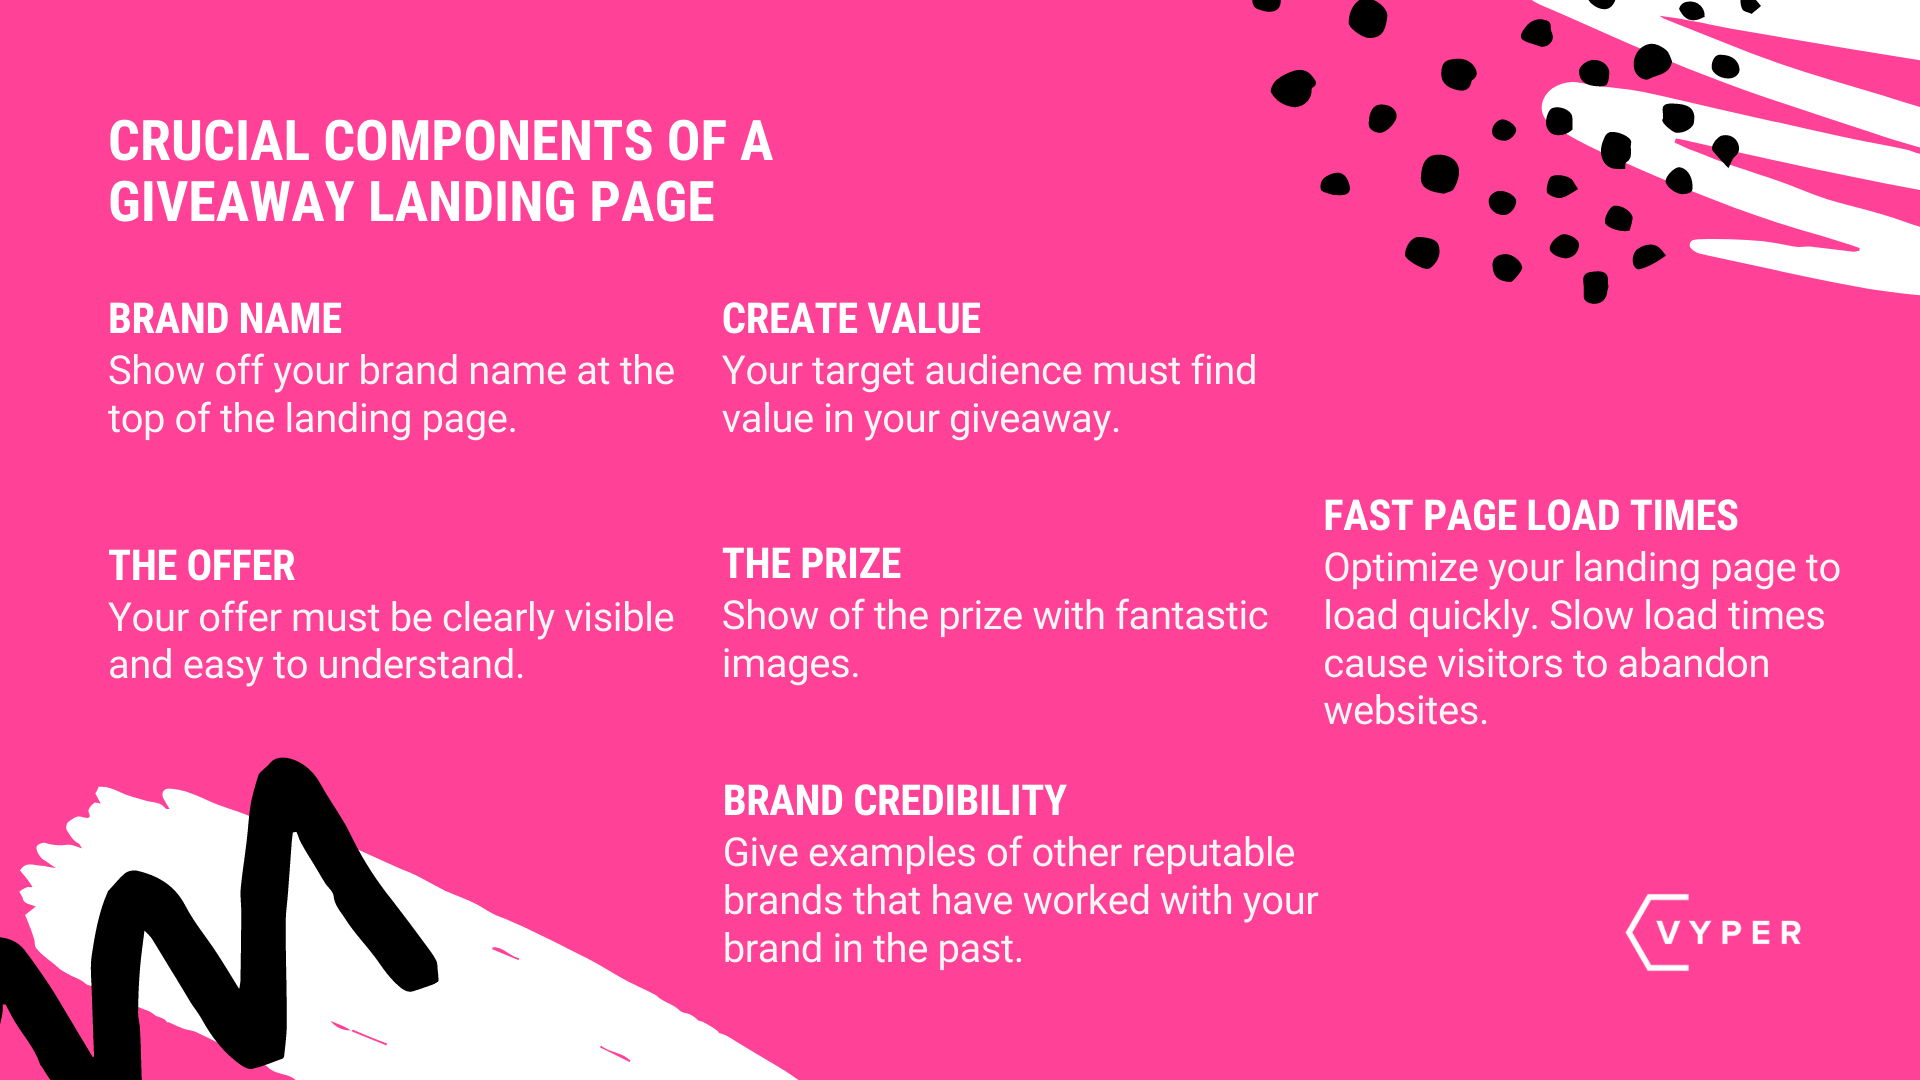 Giveaway Landing Page Infographic